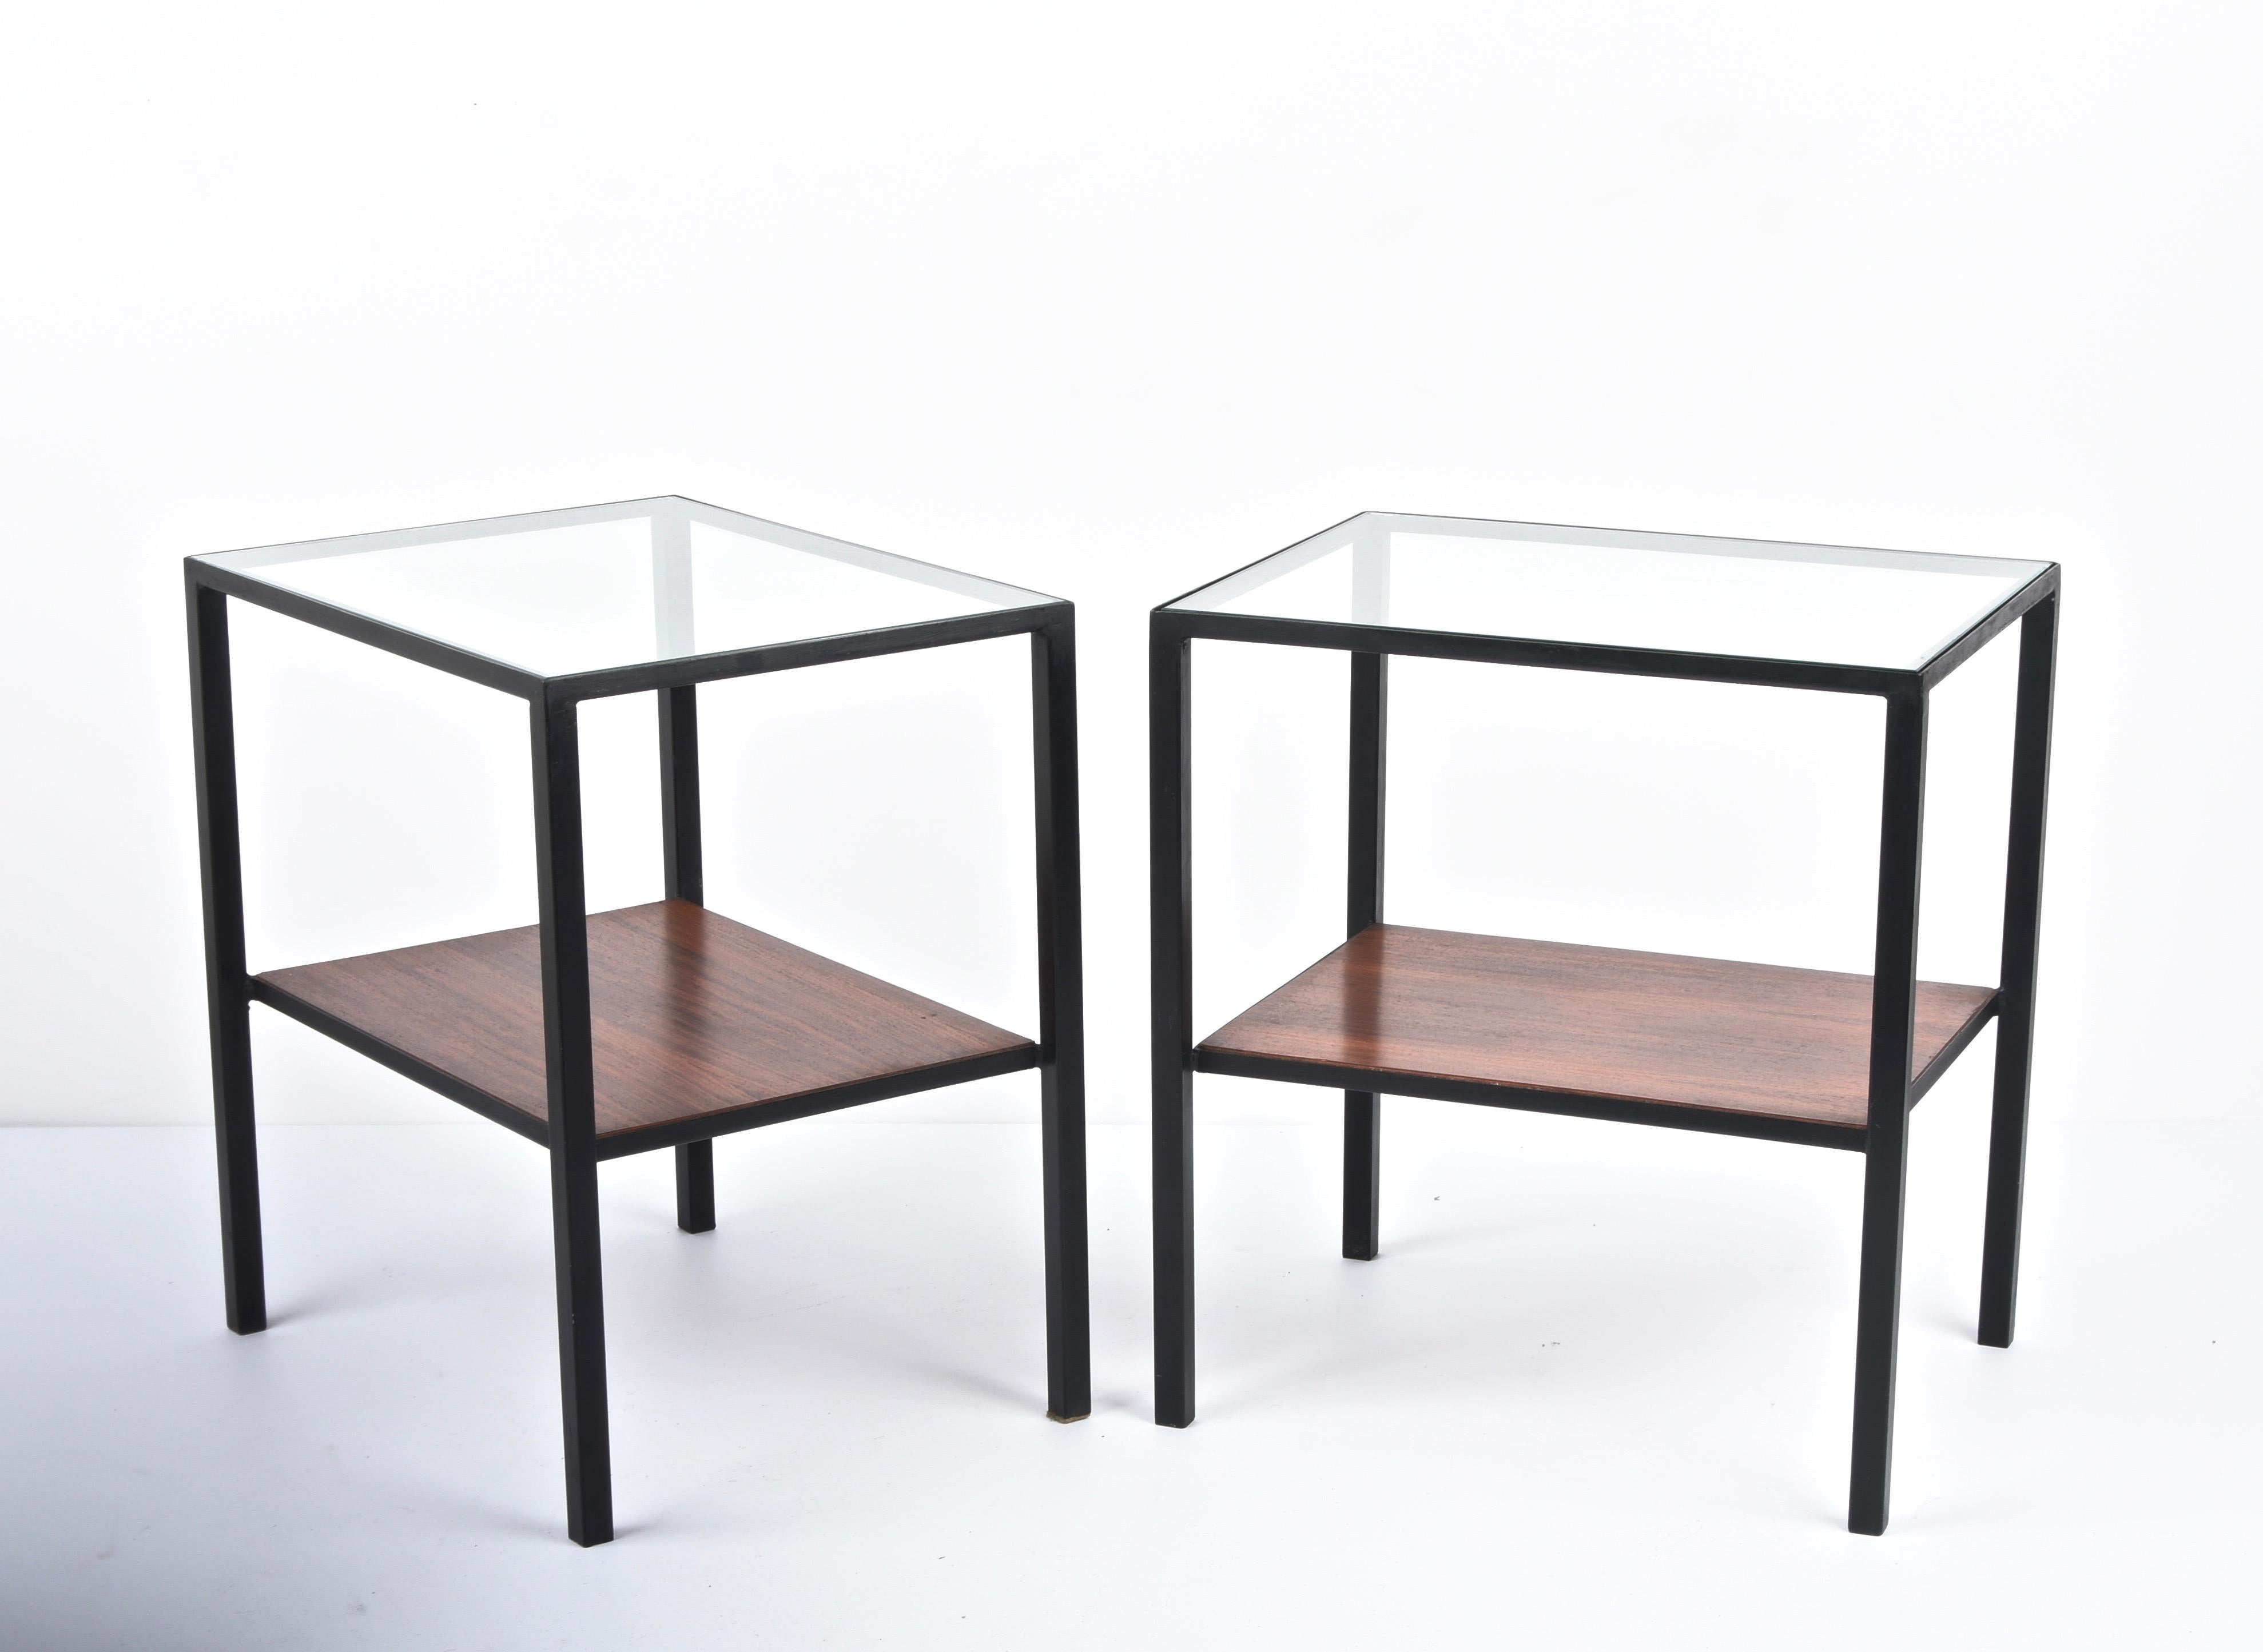 Pair of Iron, Glass and Wood Italian Coffee Table with Two Shelves, 1960s For Sale 5